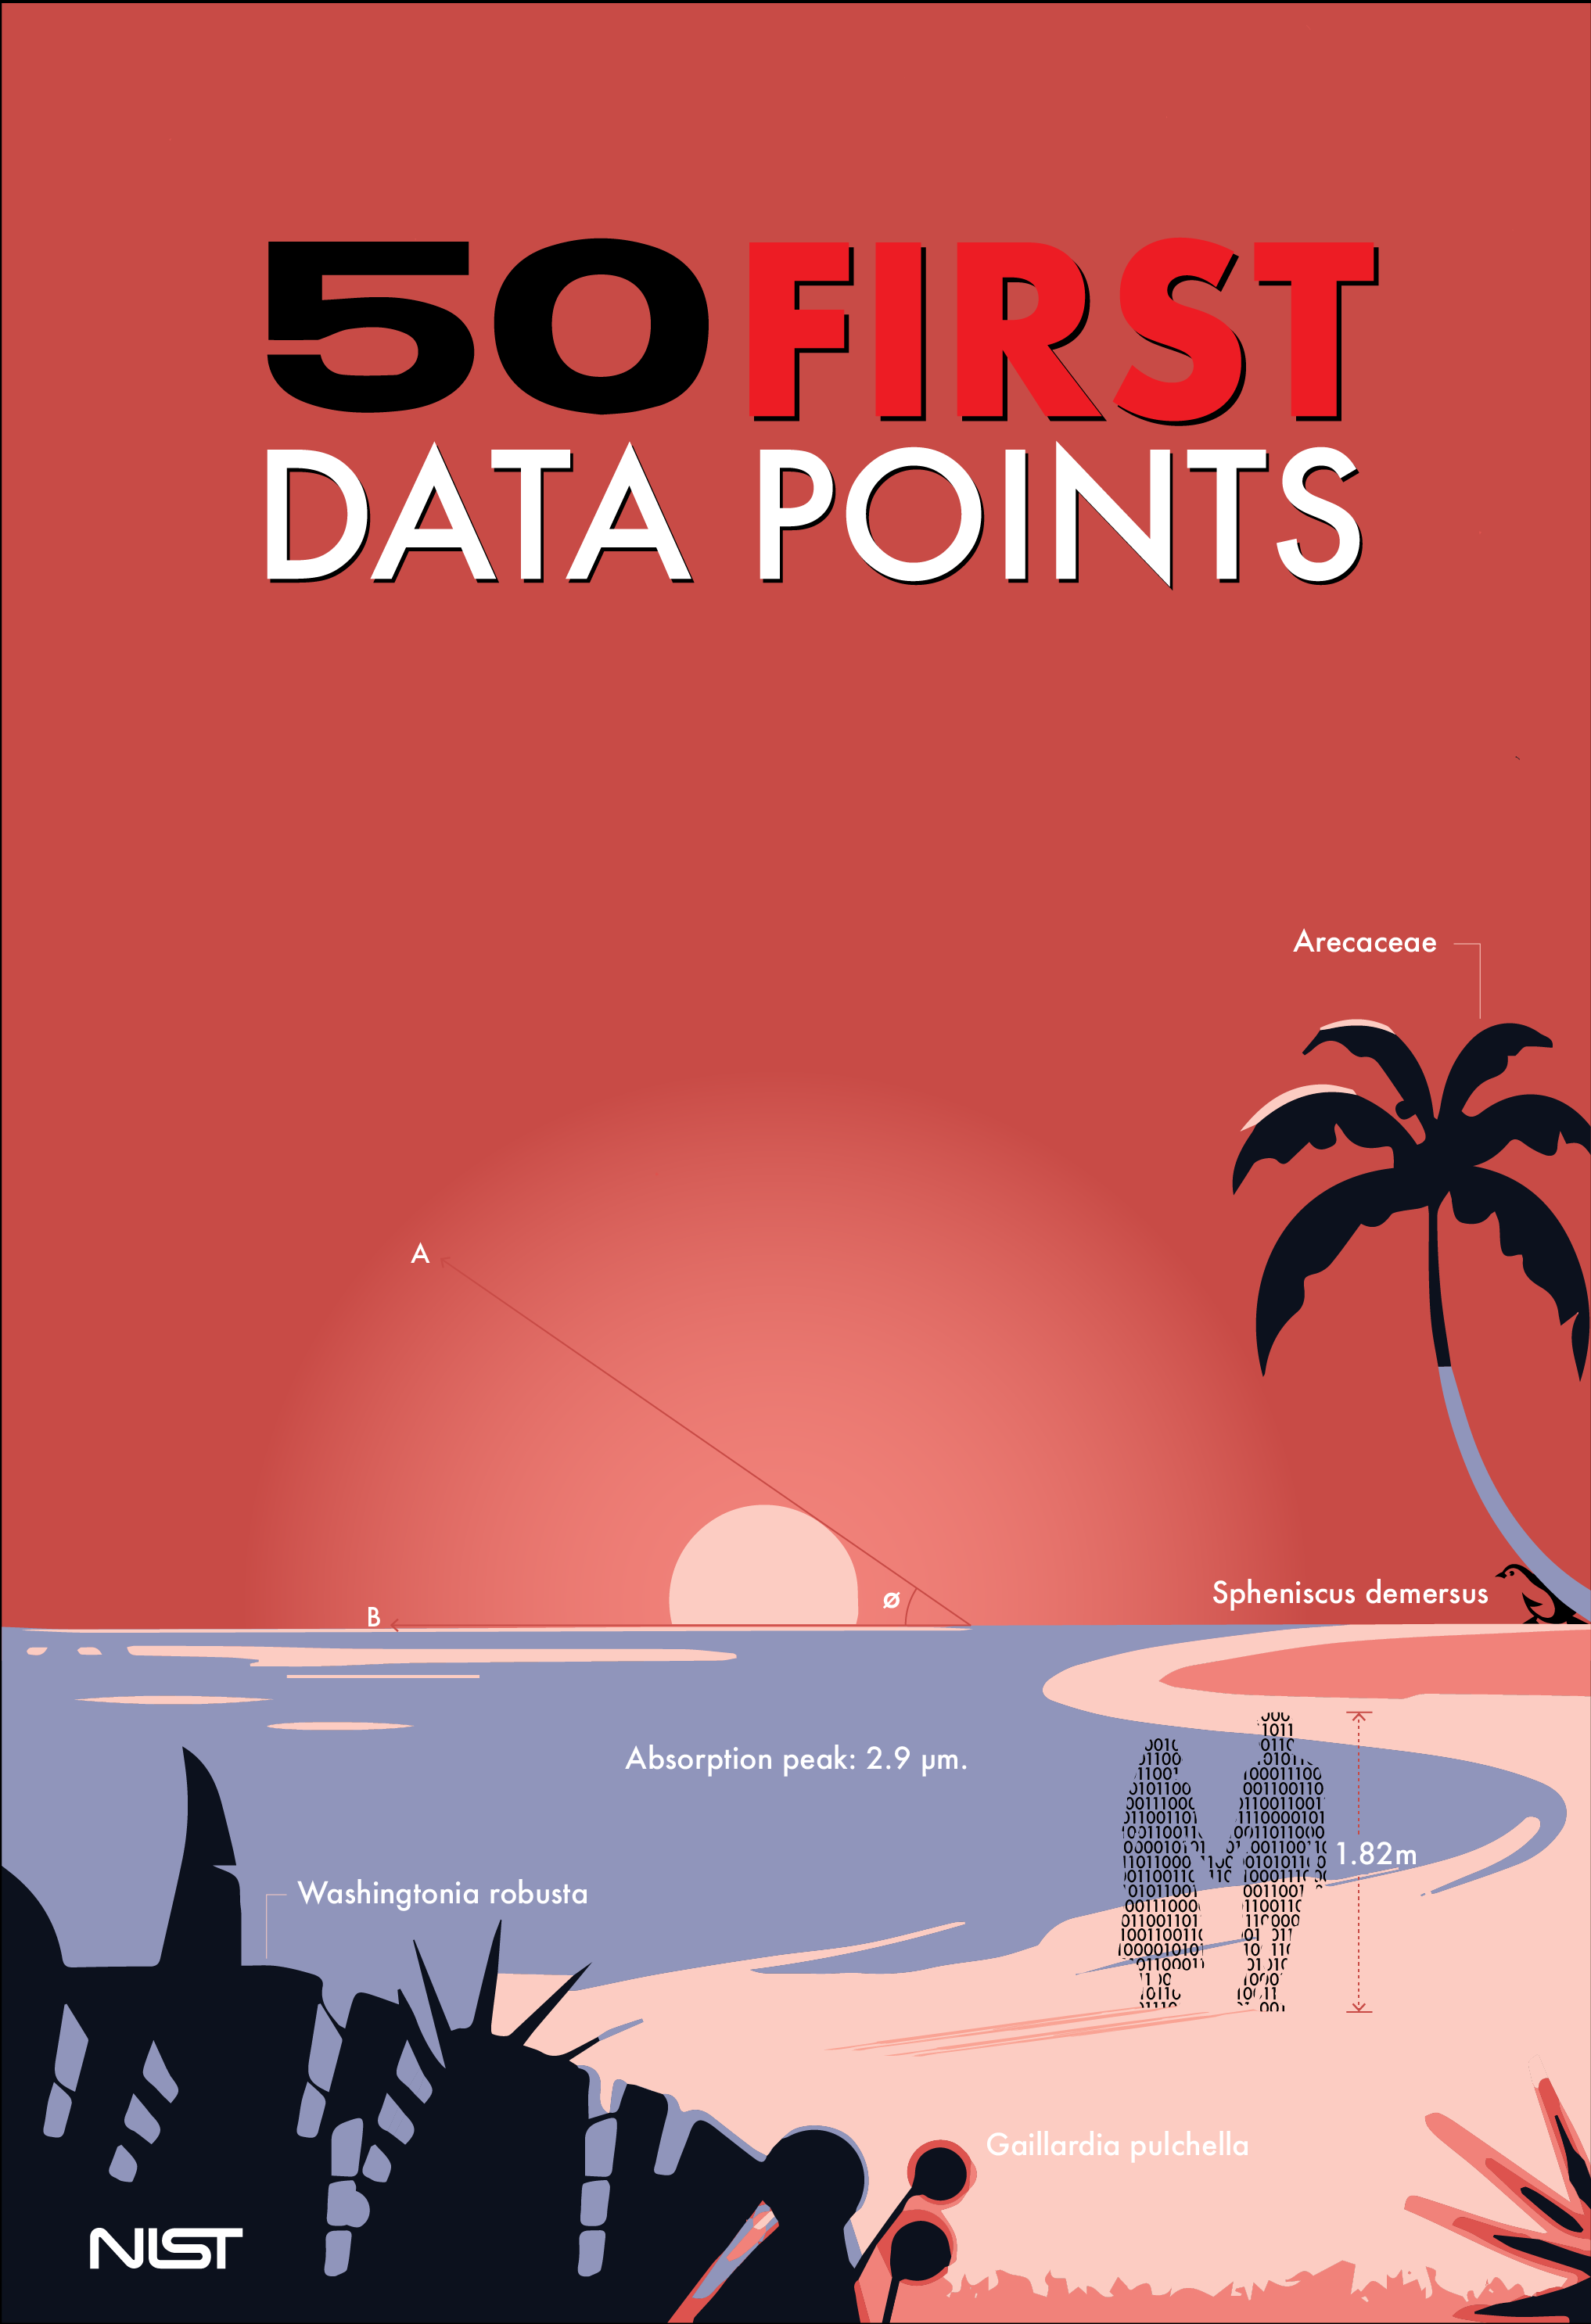 Pink sky. Top: 50 First Data Points. Island. Faint background of people walking. Palm tree. Setting sun. Penguin. Plants. Measurements around all objects